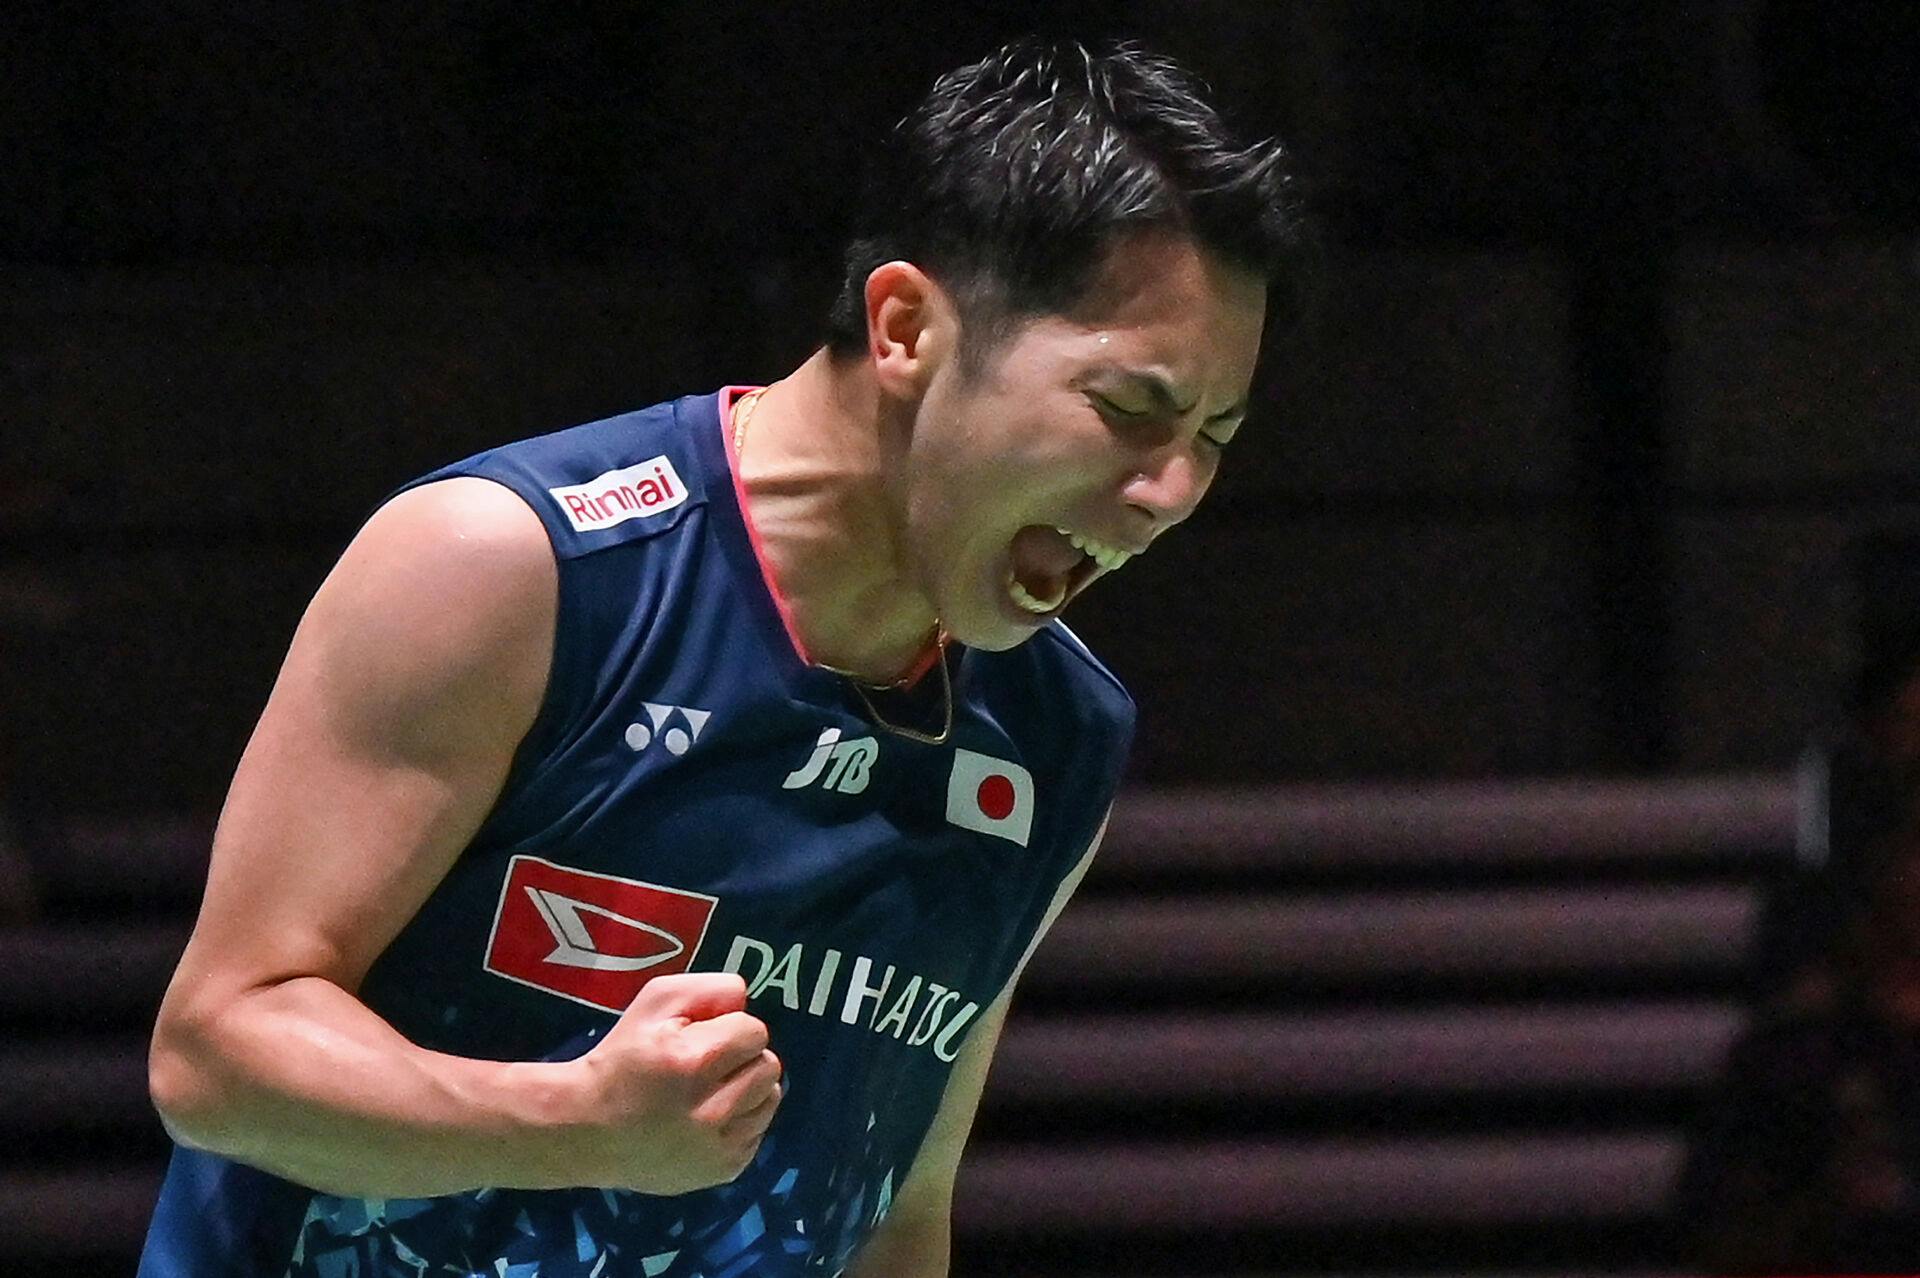 Koki Watanabe of Japan celebrates winning match point against Kento Momota of Japan during their men's singles match on the second day of the Japan Open badminton tournament in Tokyo on July 26, 2023. Richard A. Brooks / AFP